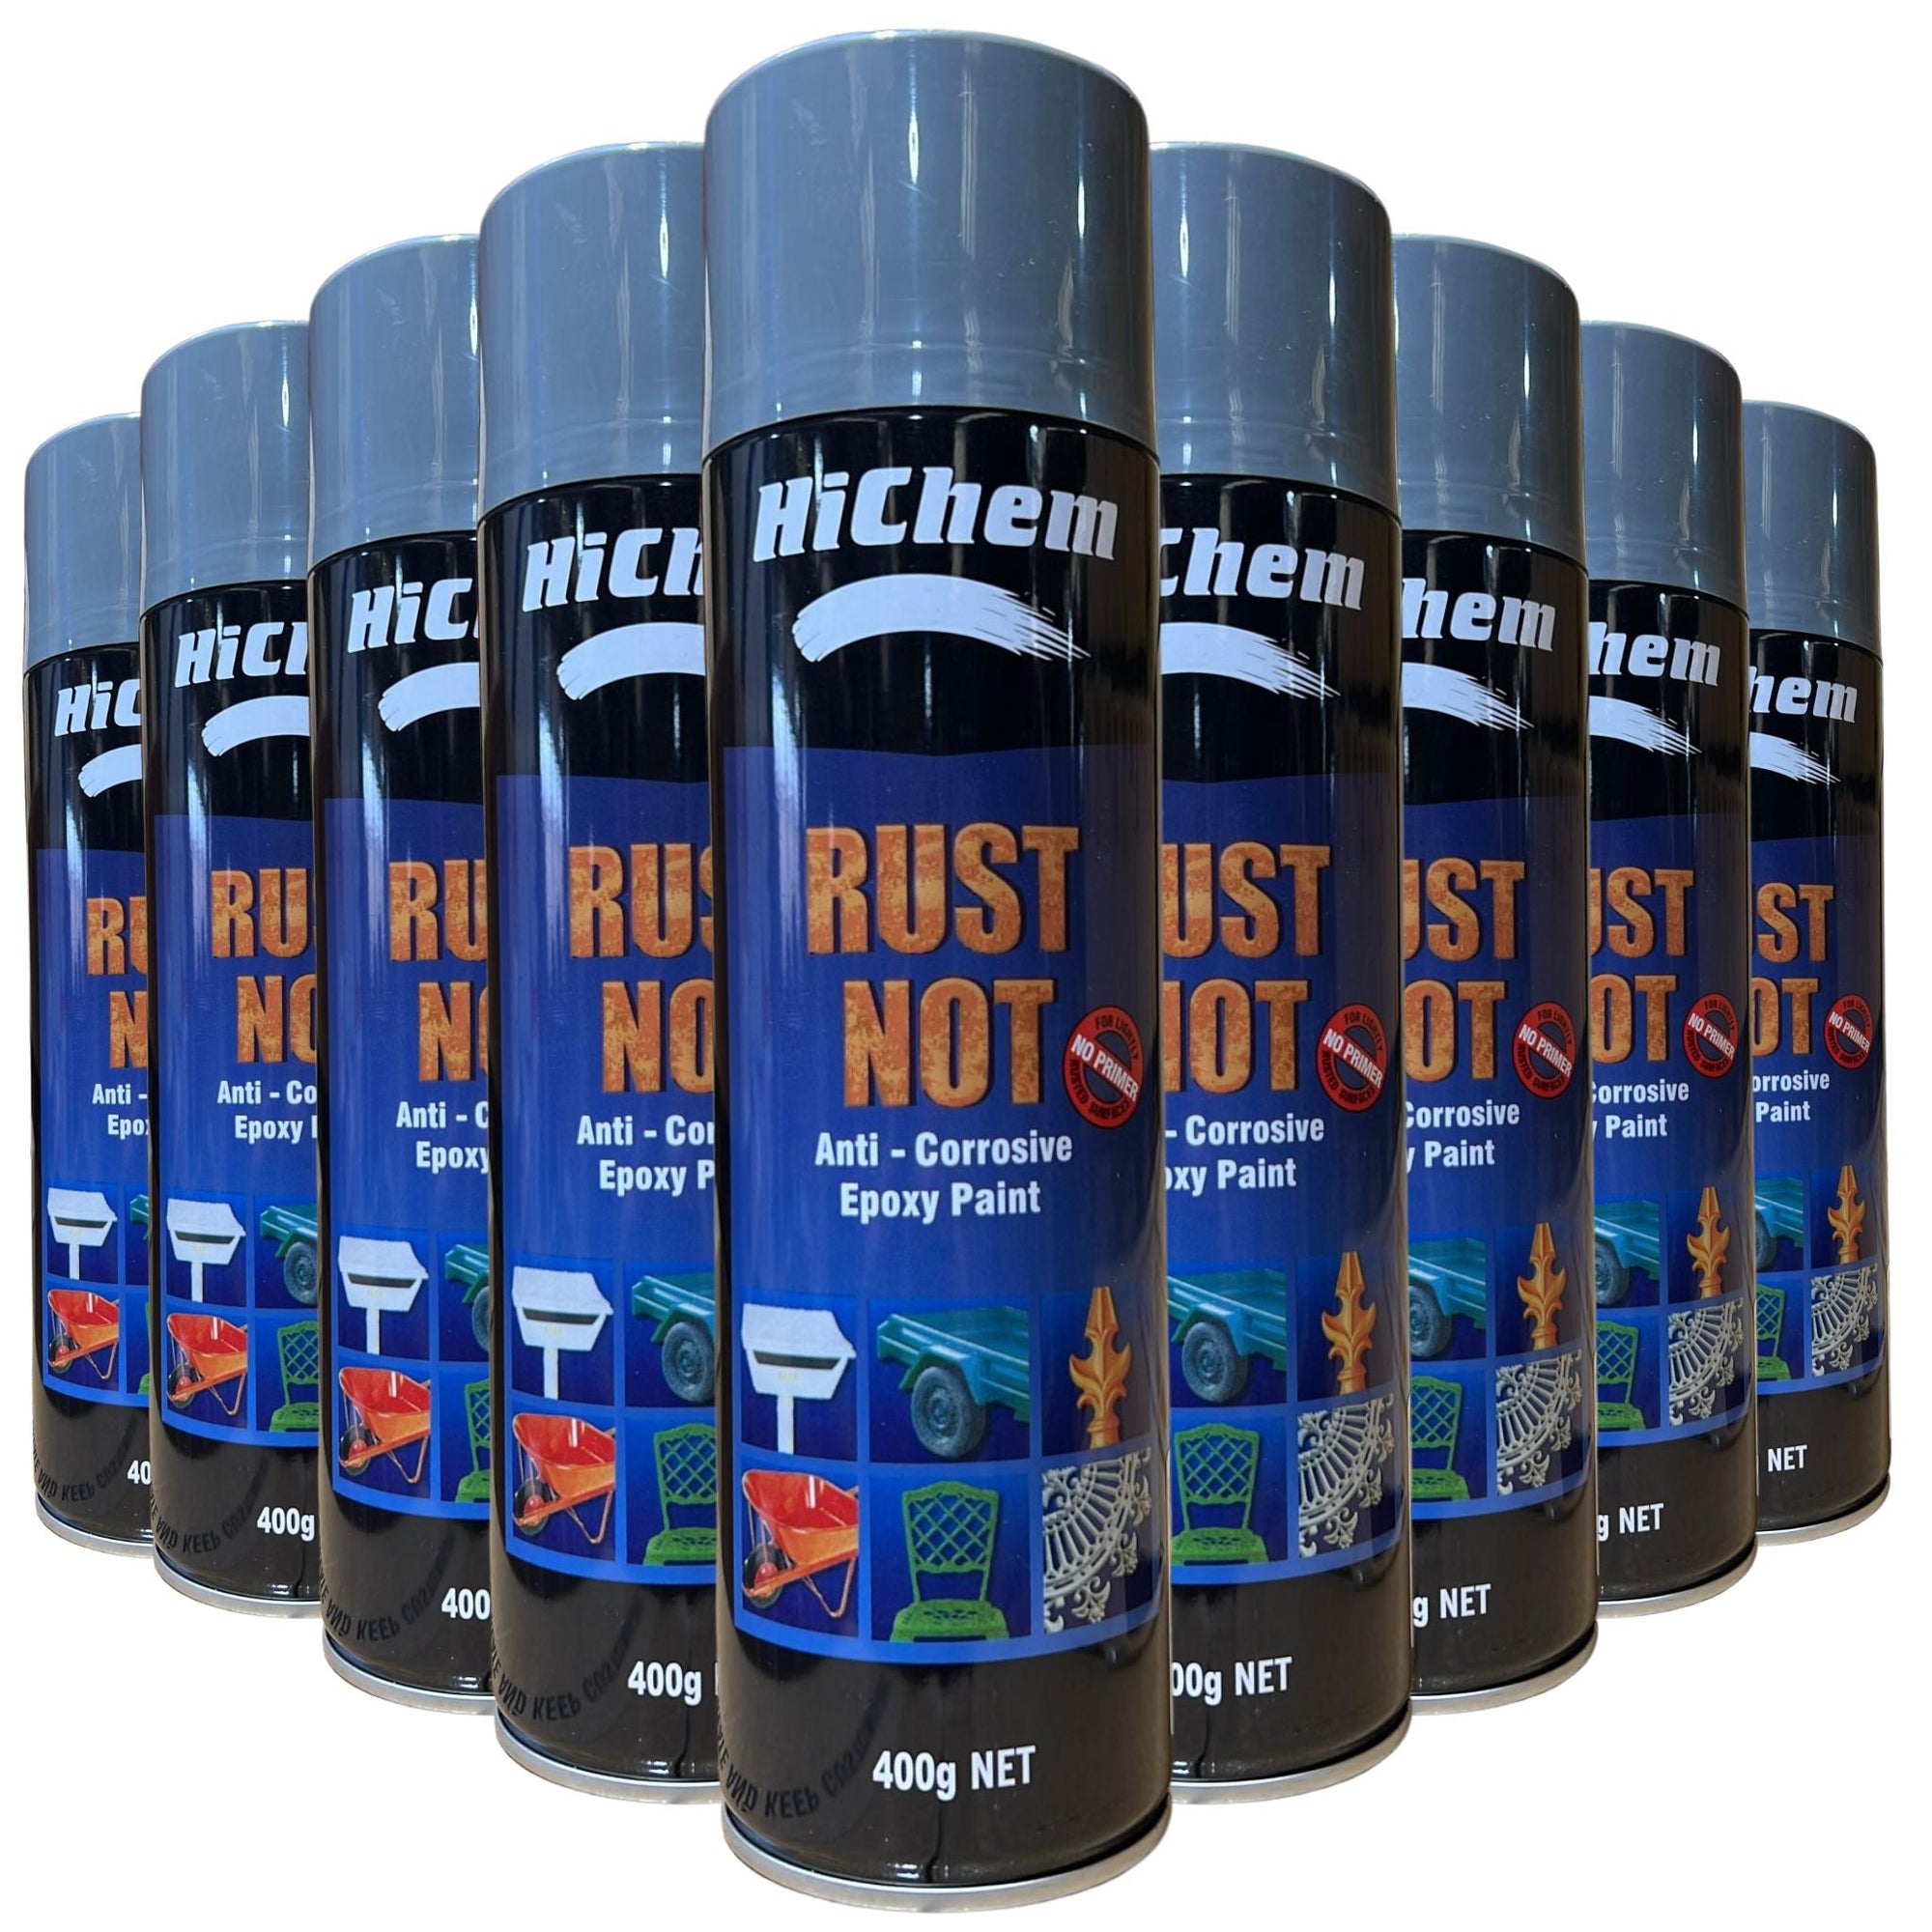 Rust Not RNN63400 PEWTER N63 Epoxy Paint 400g - HiChem (12 Cans) - South East Clearance Centre